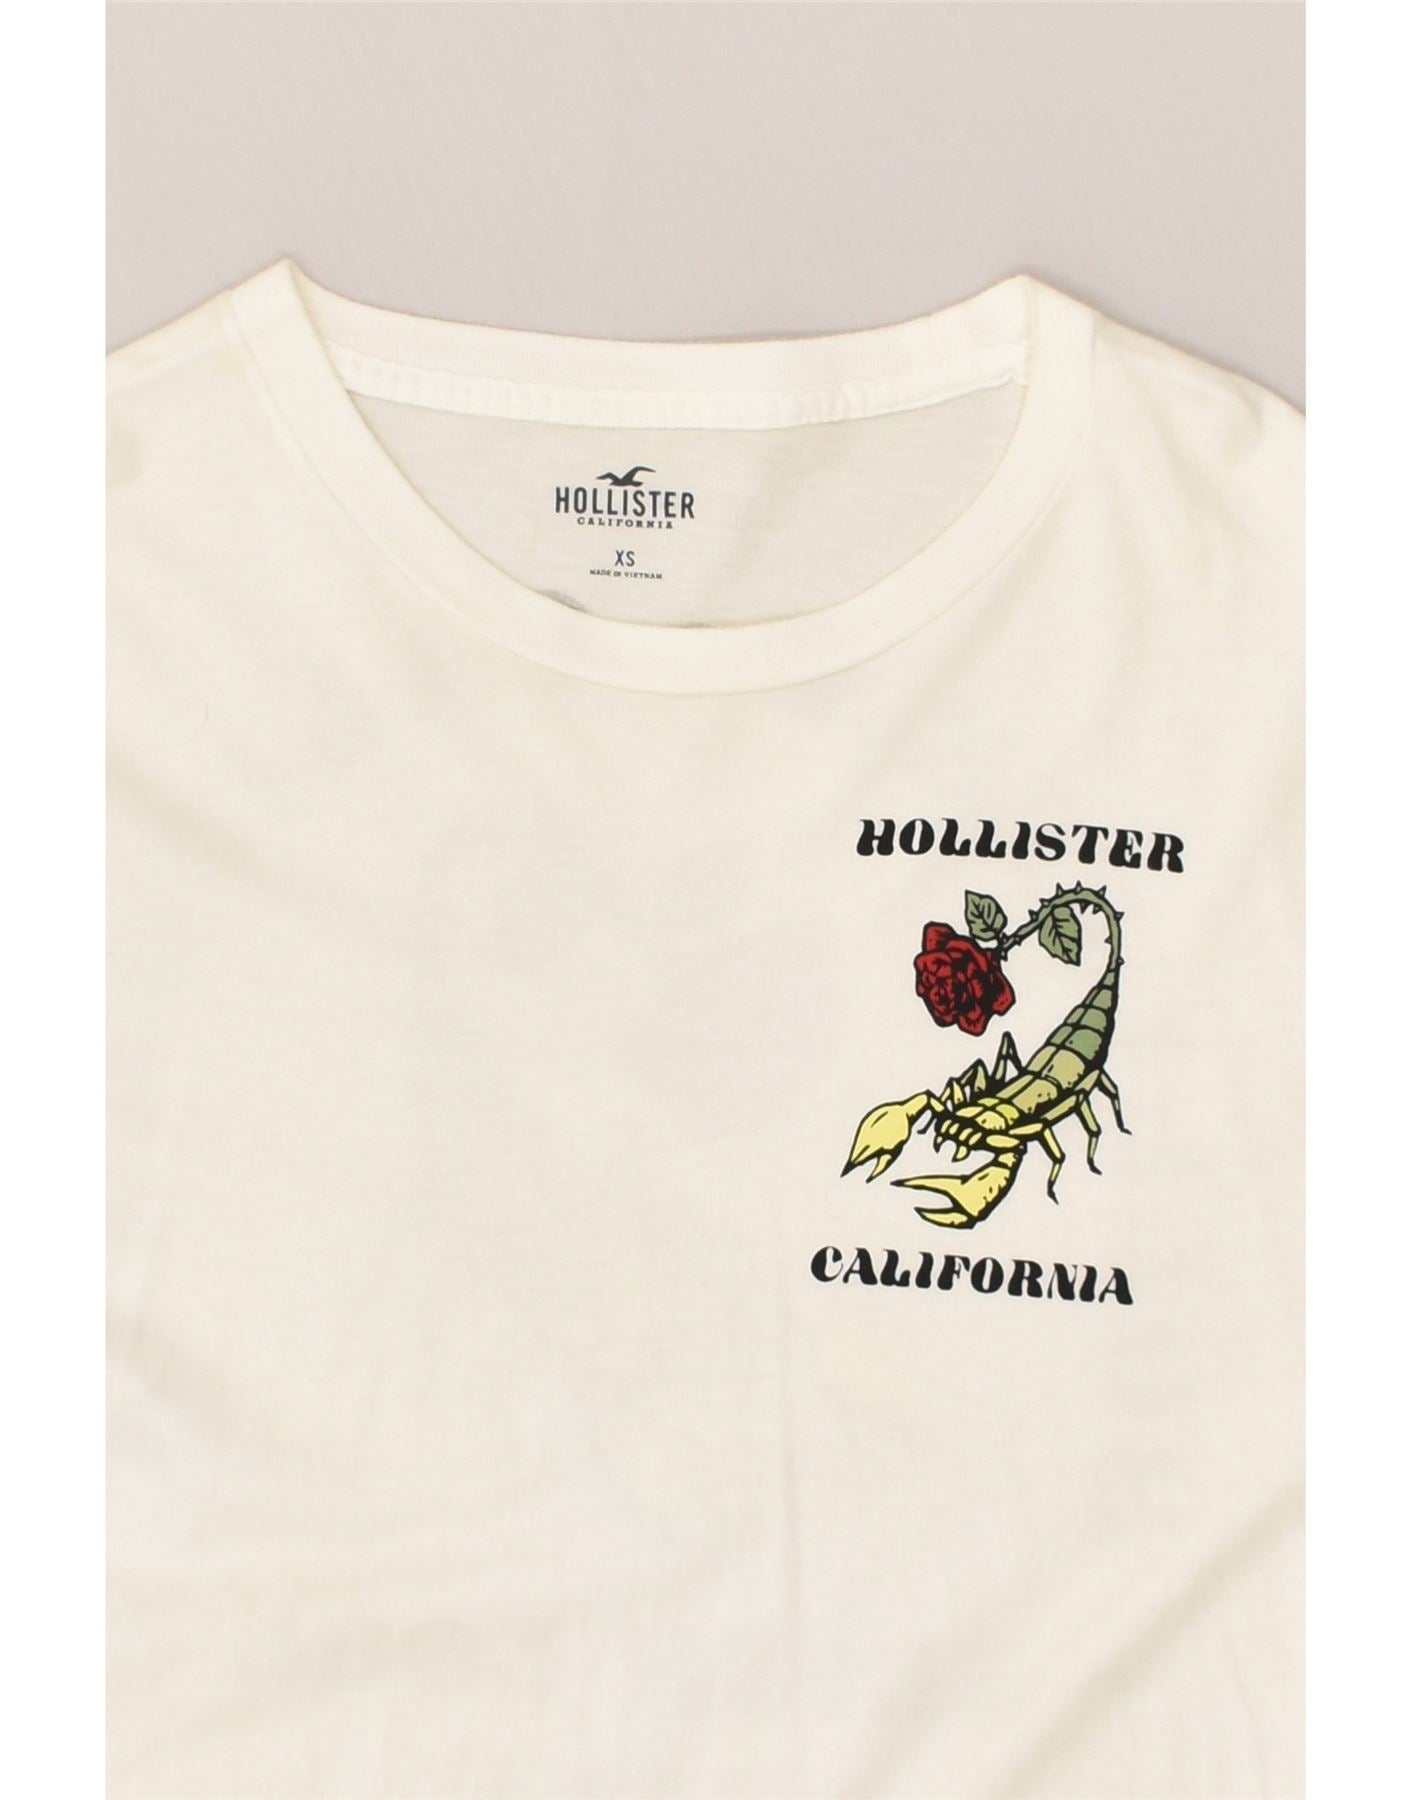 HOLLISTER Womens Graphic Top Long Sleeve UK 6 XS Off White Cotton, Vintage  & Second-Hand Clothing Online